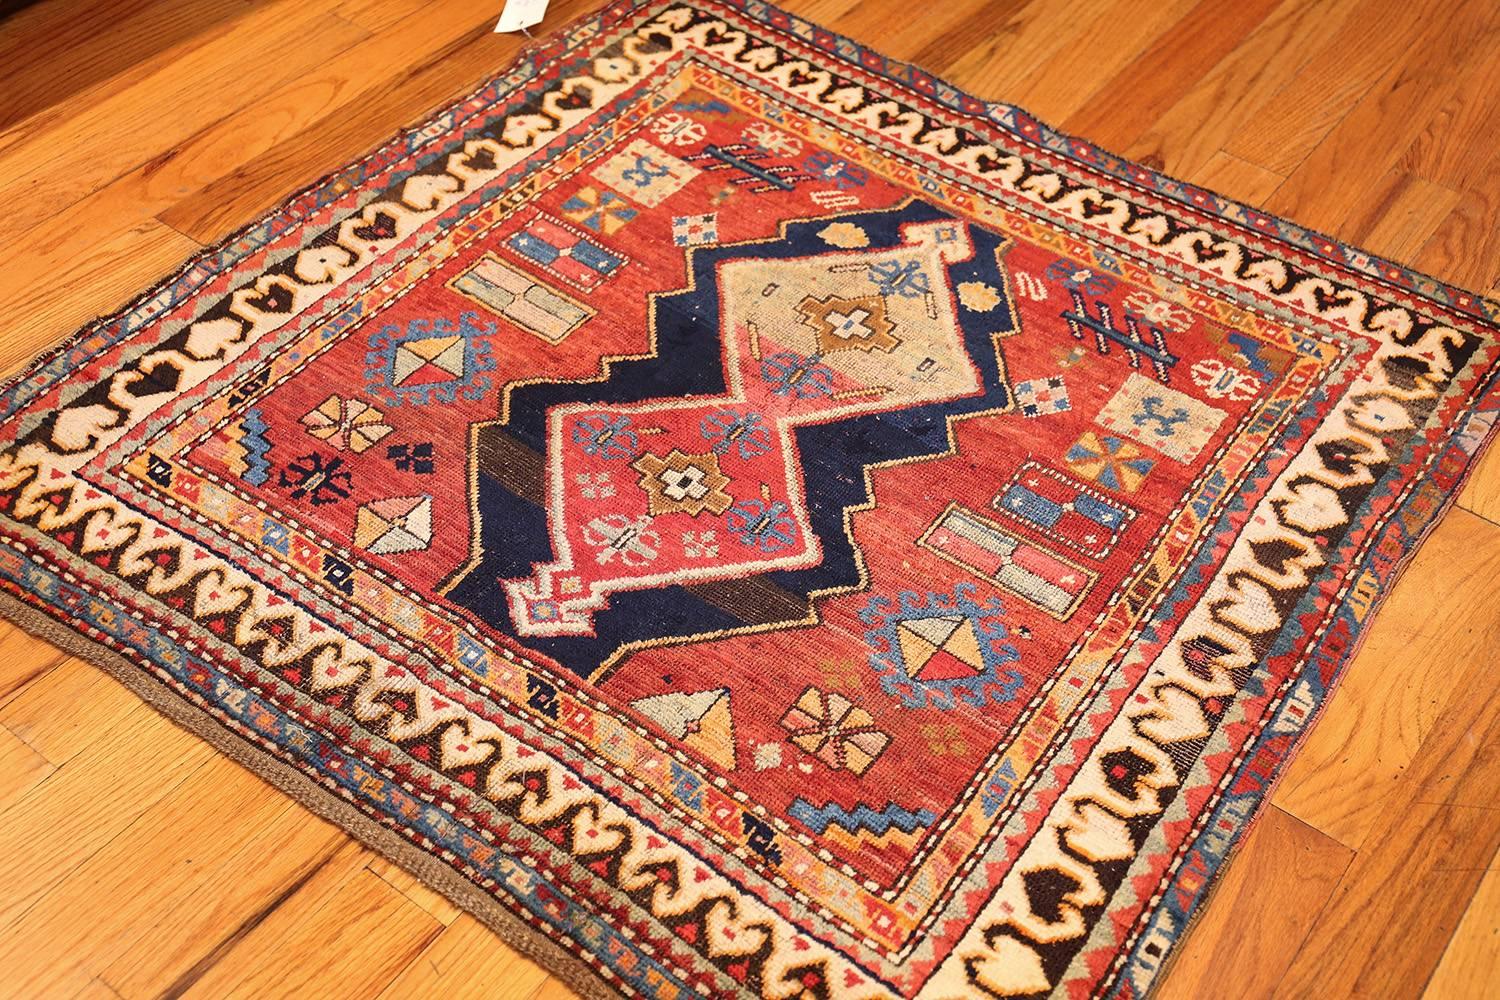 Beautiful antique tribal square Caucasian Kazak rug 49204, country of origin / rug type: Caucasian rug, date circa 1900. This antique Caucasian rug, utilizing a dynamic square shape, fills any space with a lively and attractive display. Emblazoned